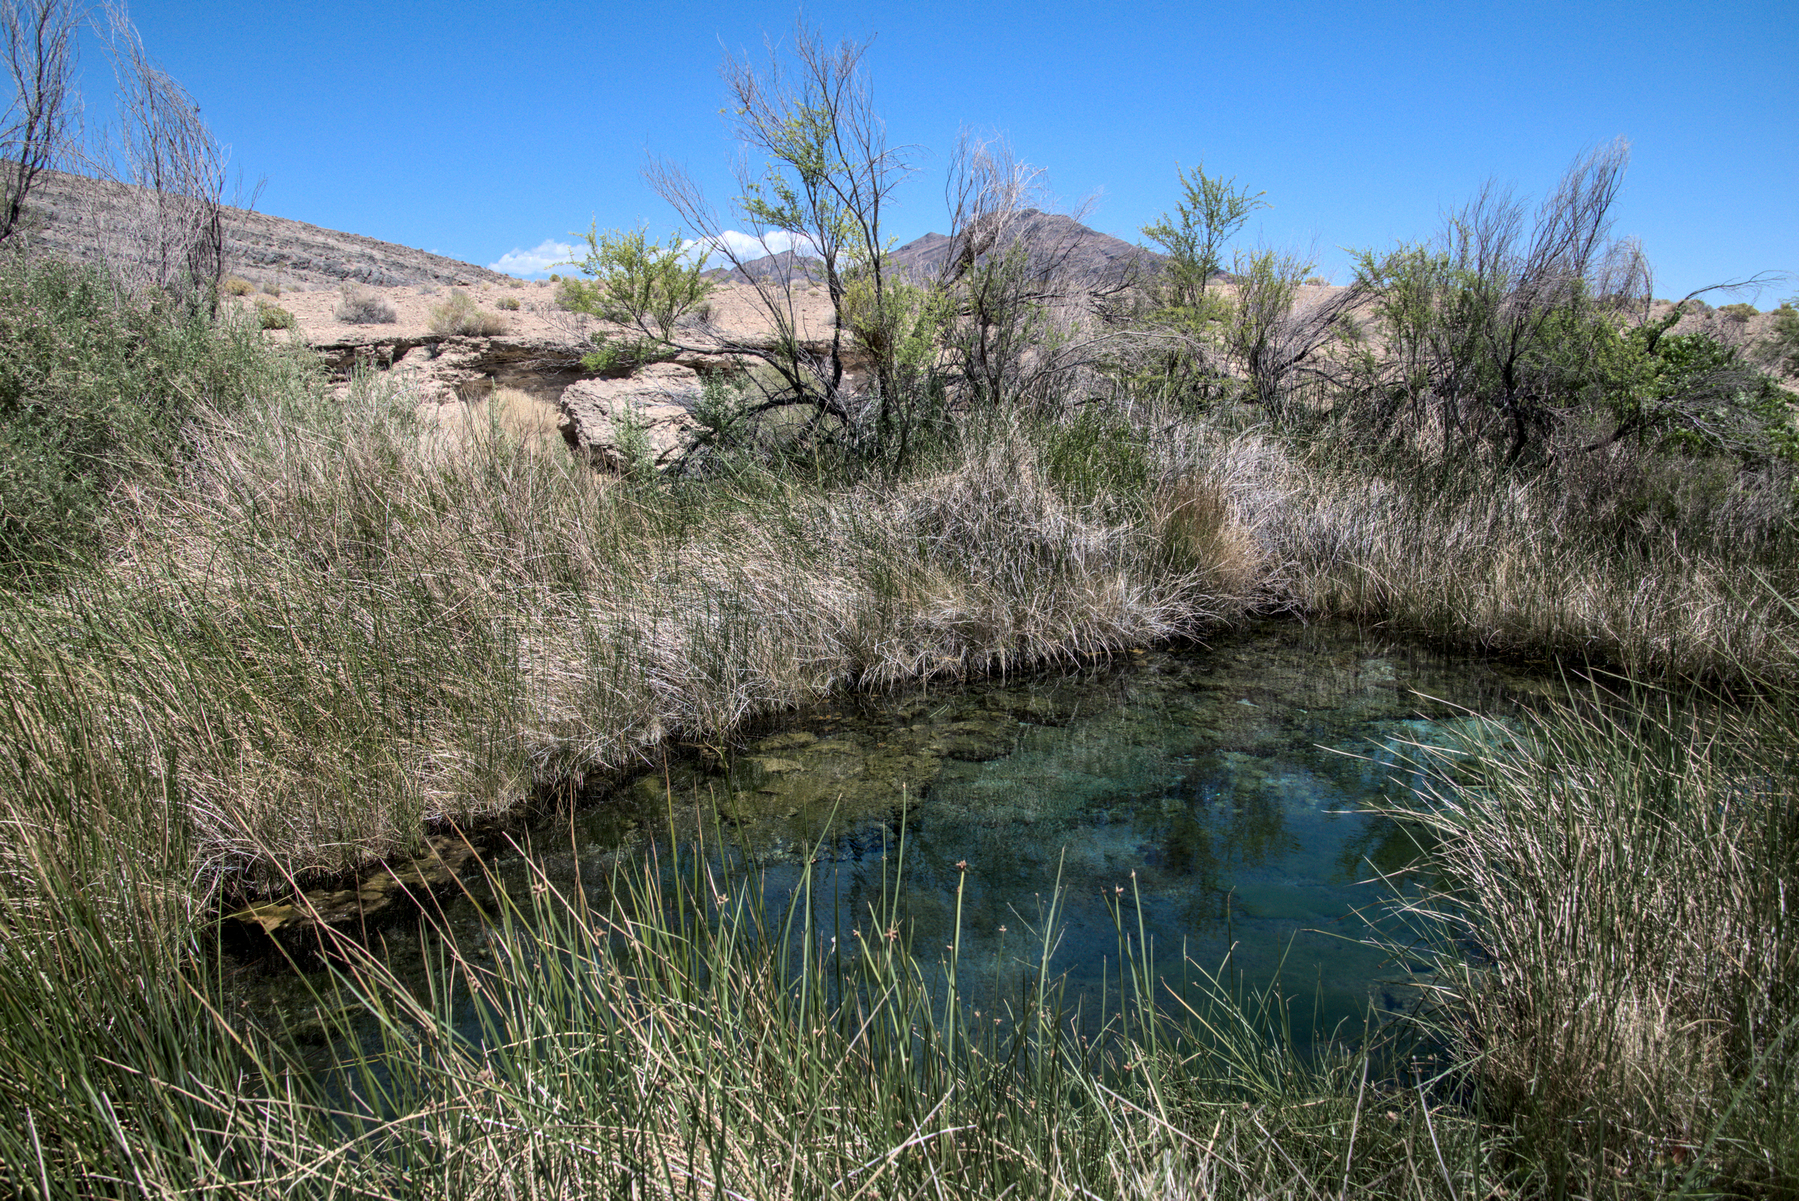 A blue green pool in the desert, surrounded by low  bushes, formed by a spring.